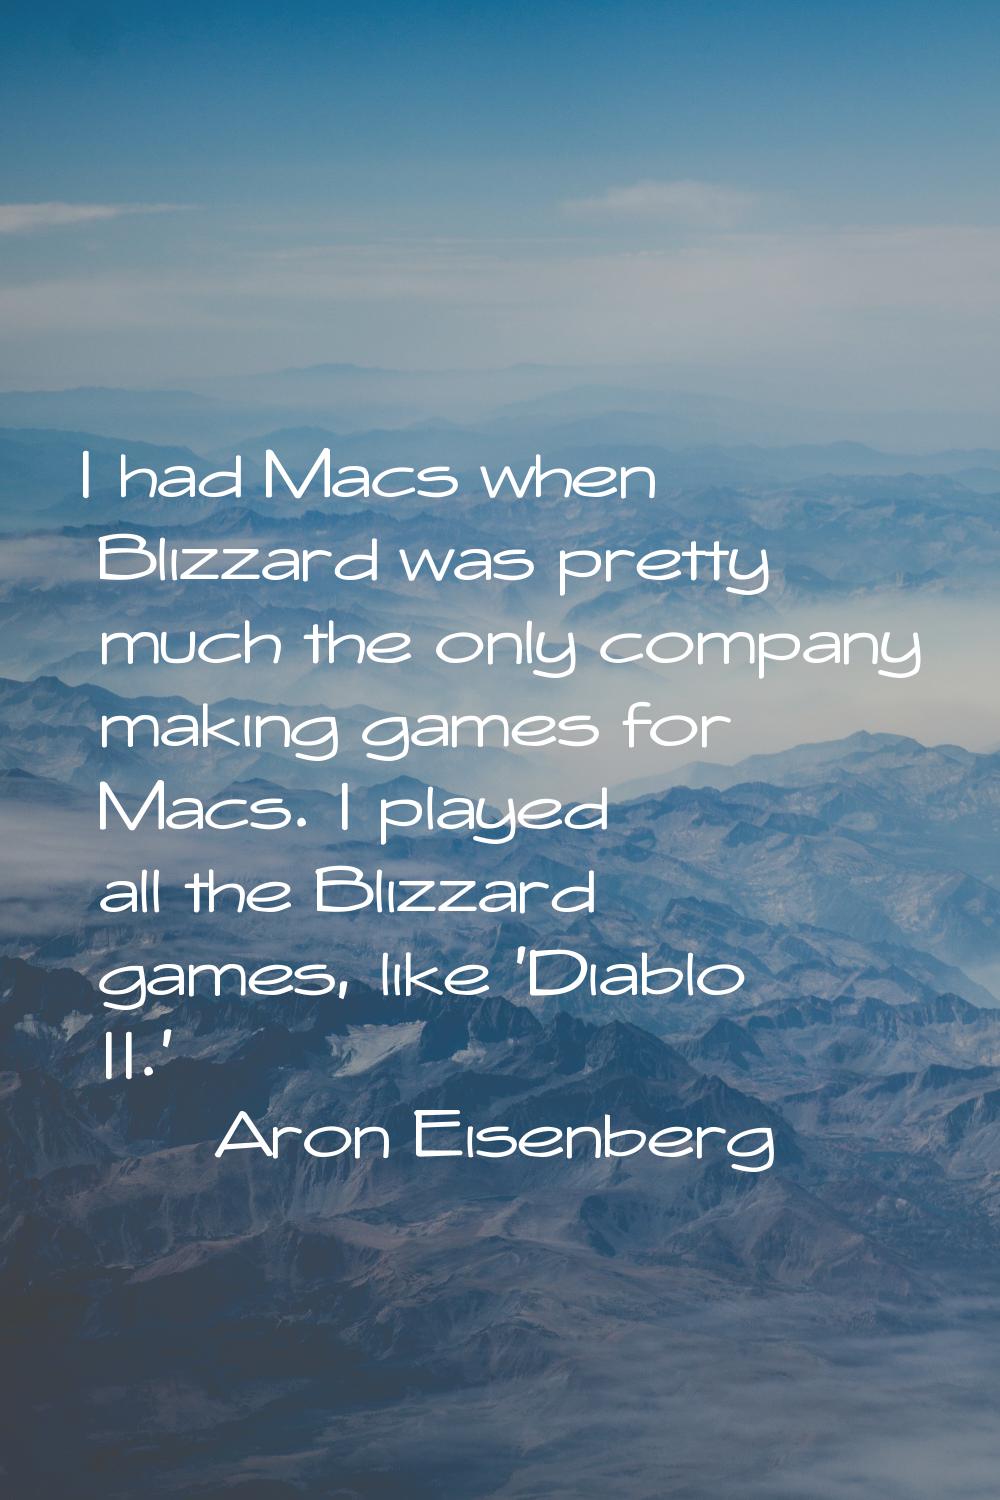 I had Macs when Blizzard was pretty much the only company making games for Macs. I played all the B